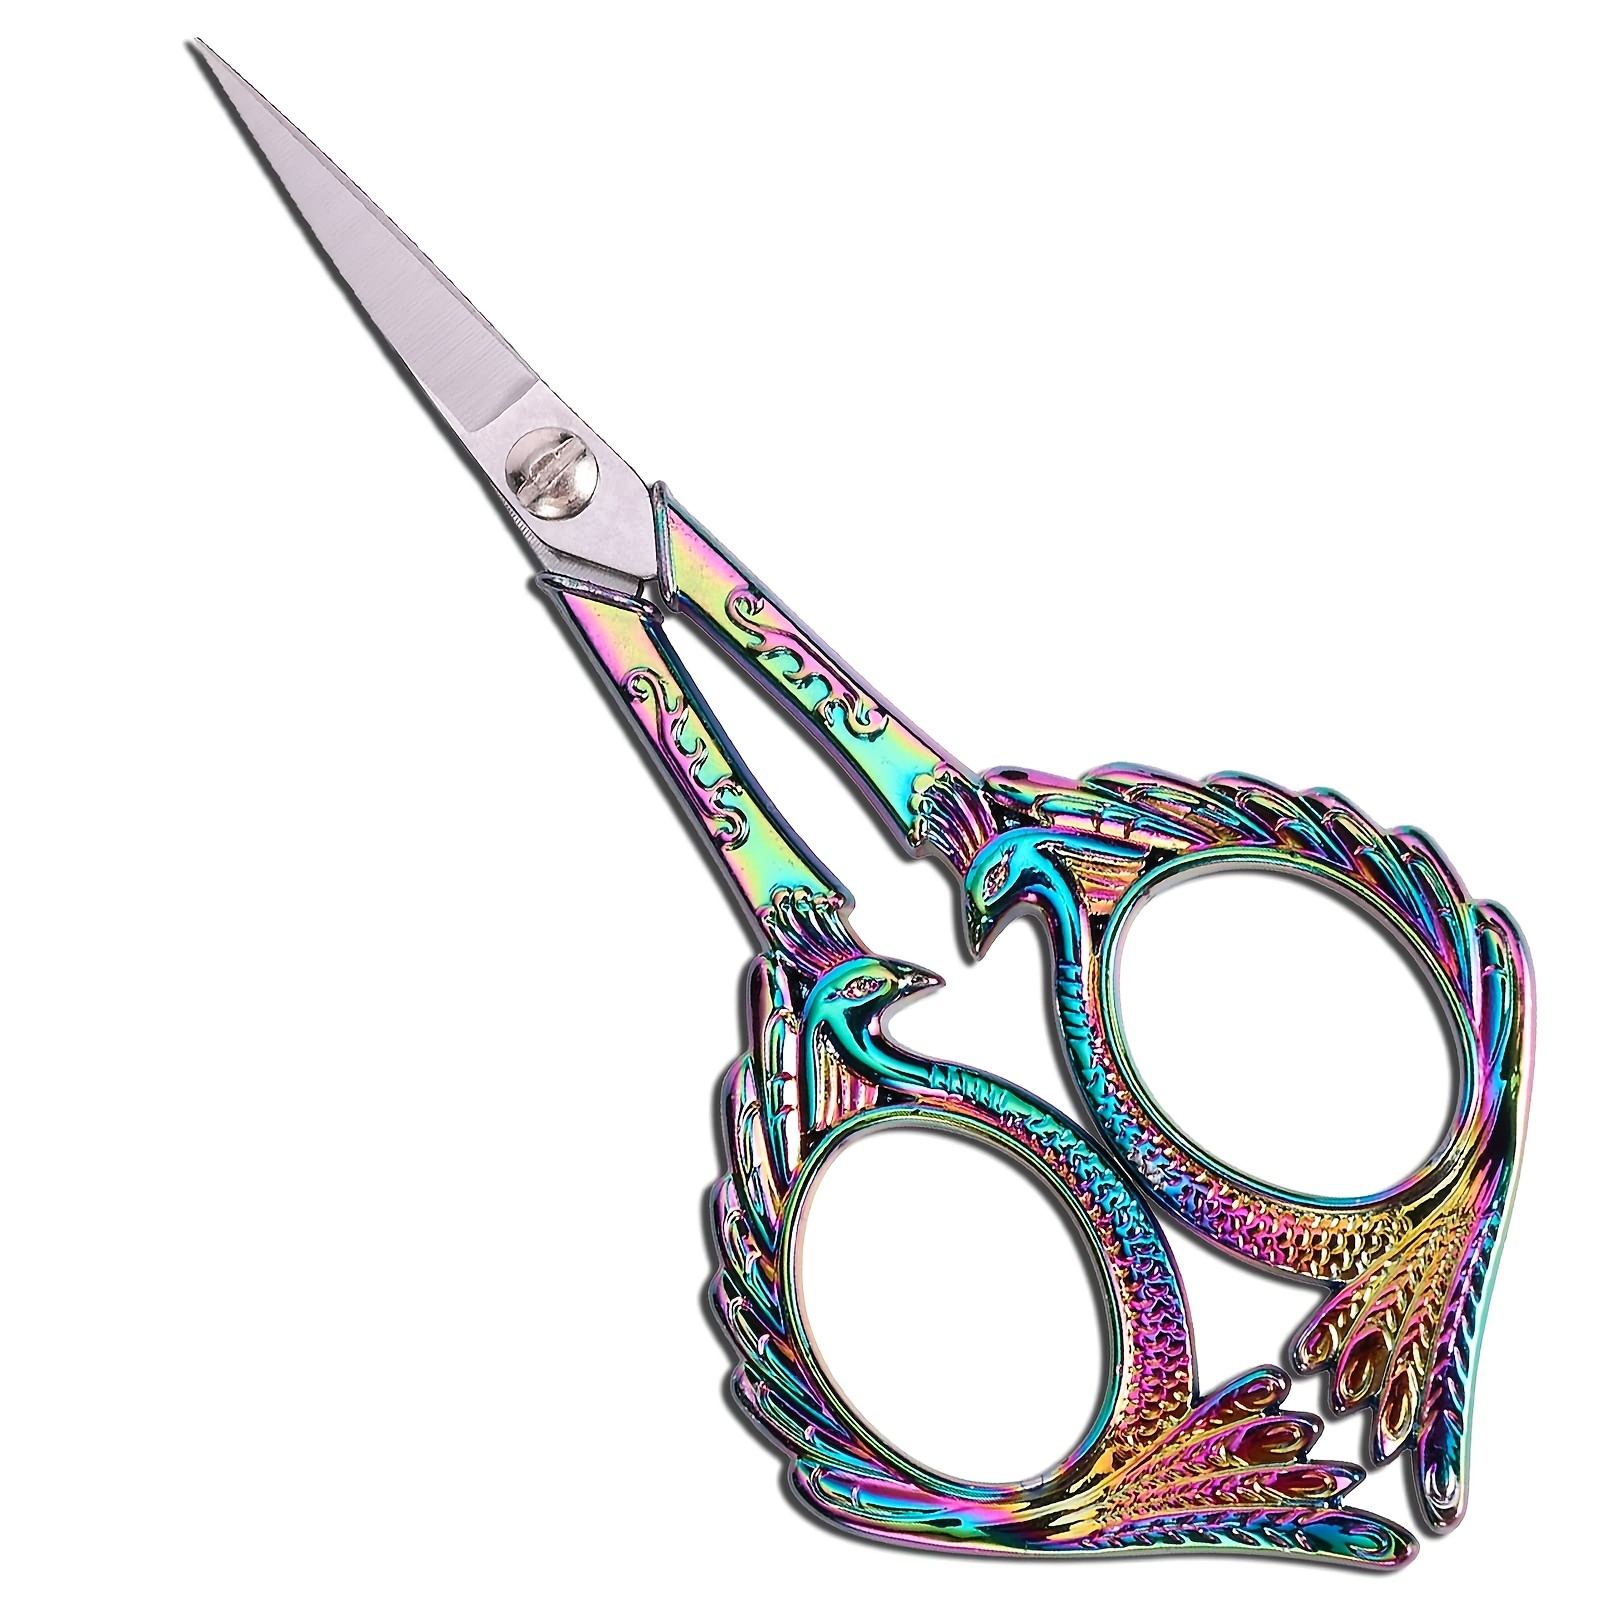 Snagshout  Vintage Embroidery Sharp Scissors 2 Pack, 5 Inches Craft Sewing  Scissor Pointed Stainless Steel Multipurpose Detail Beauty Shears for  Office Home Household Kitchen School Student Supplies